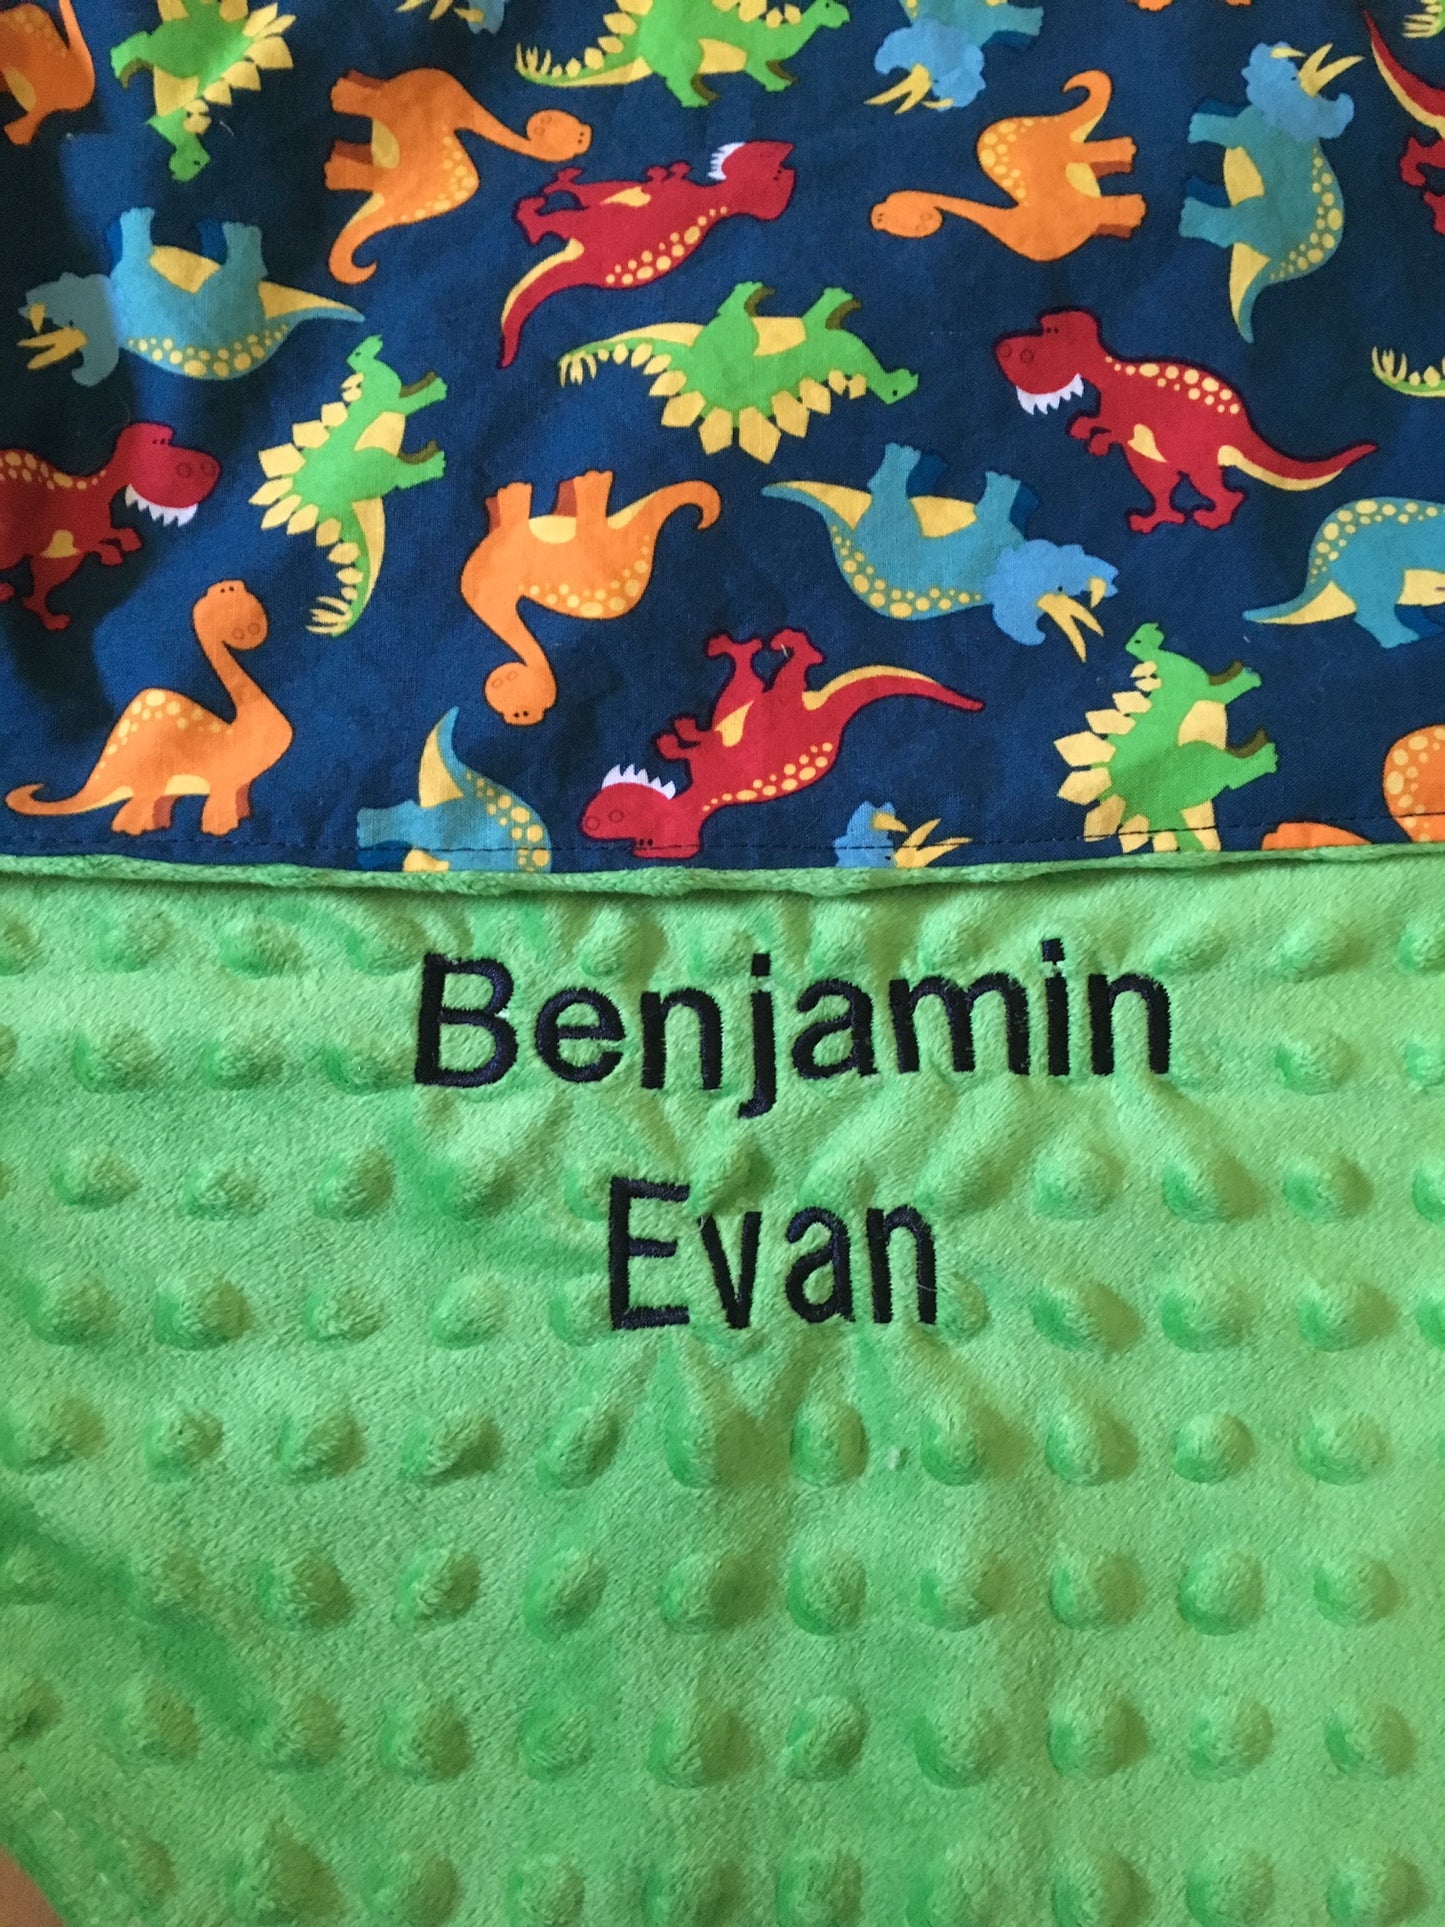 Name embroidered on a green minky for a dinosaur blanket